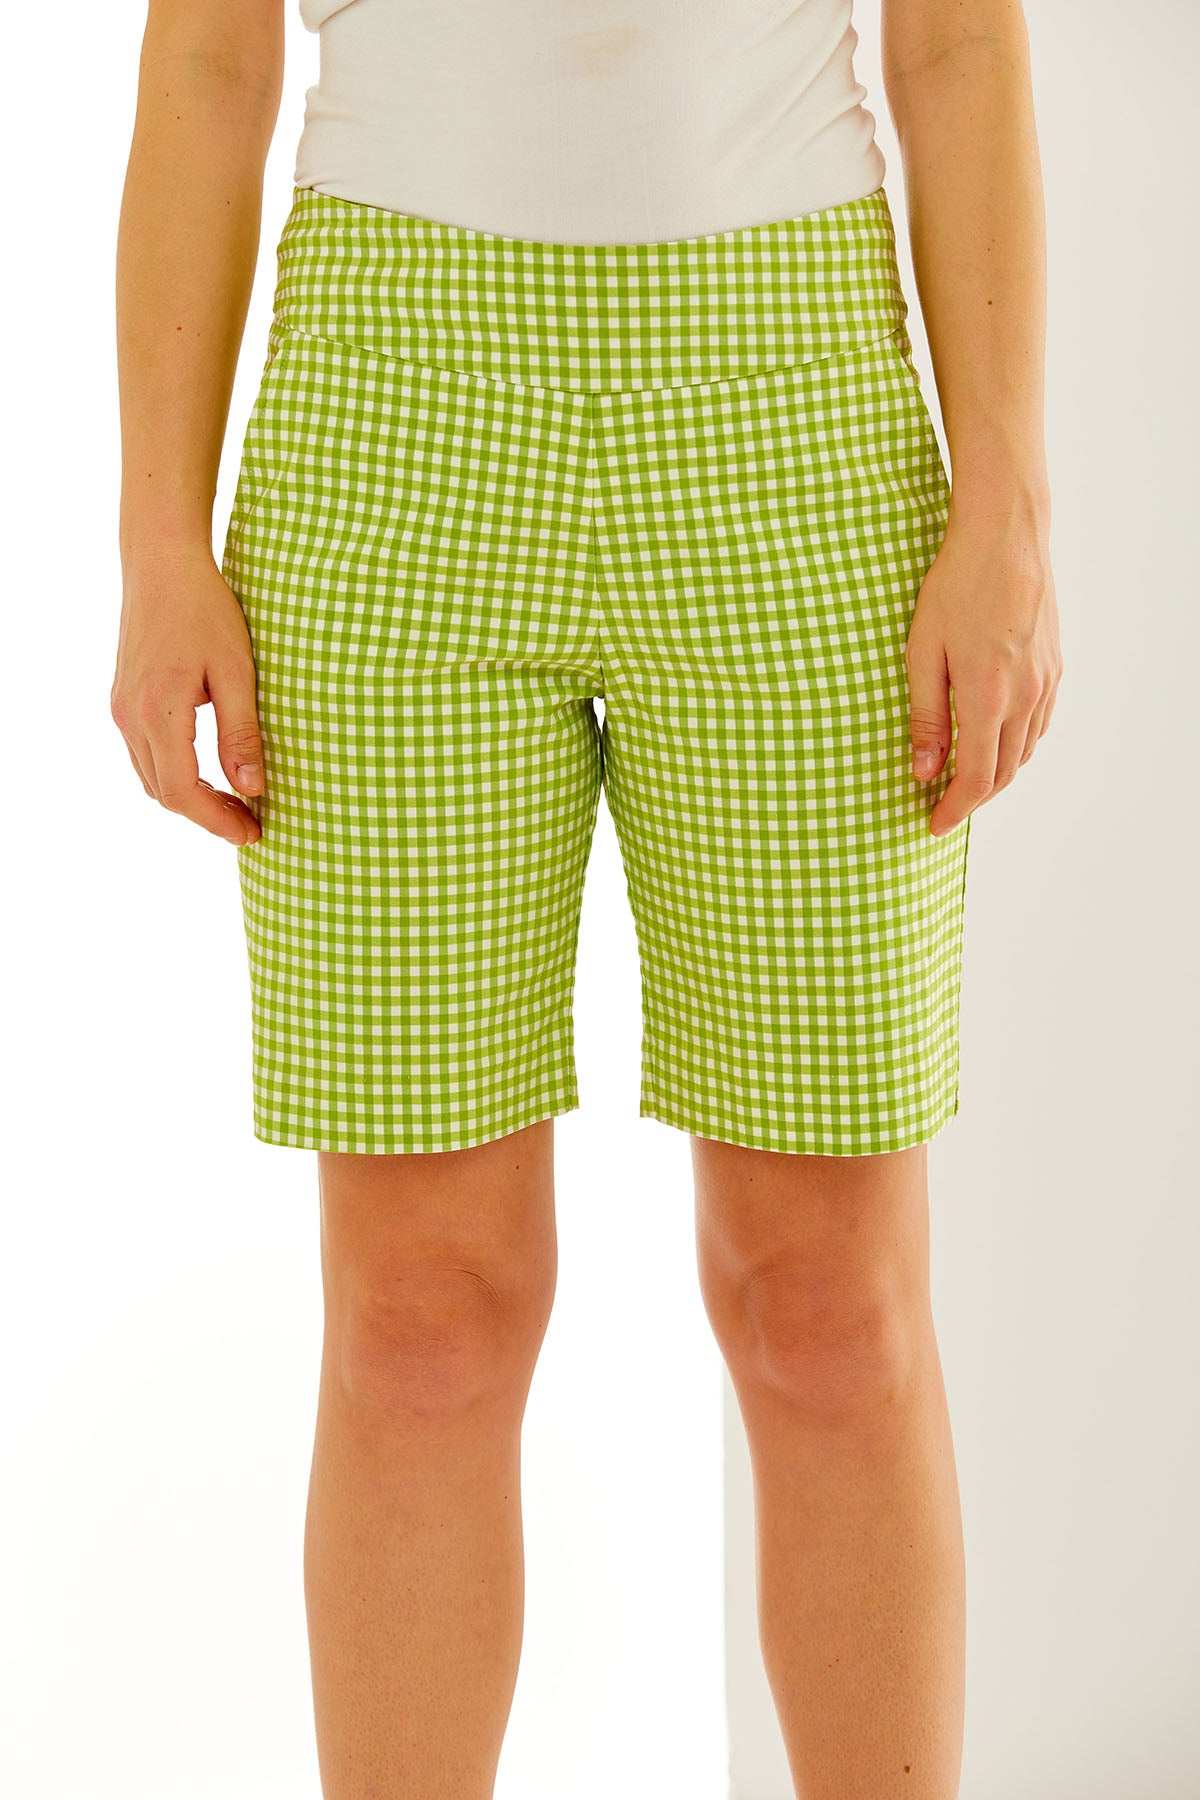 Woman in green and white gingham short